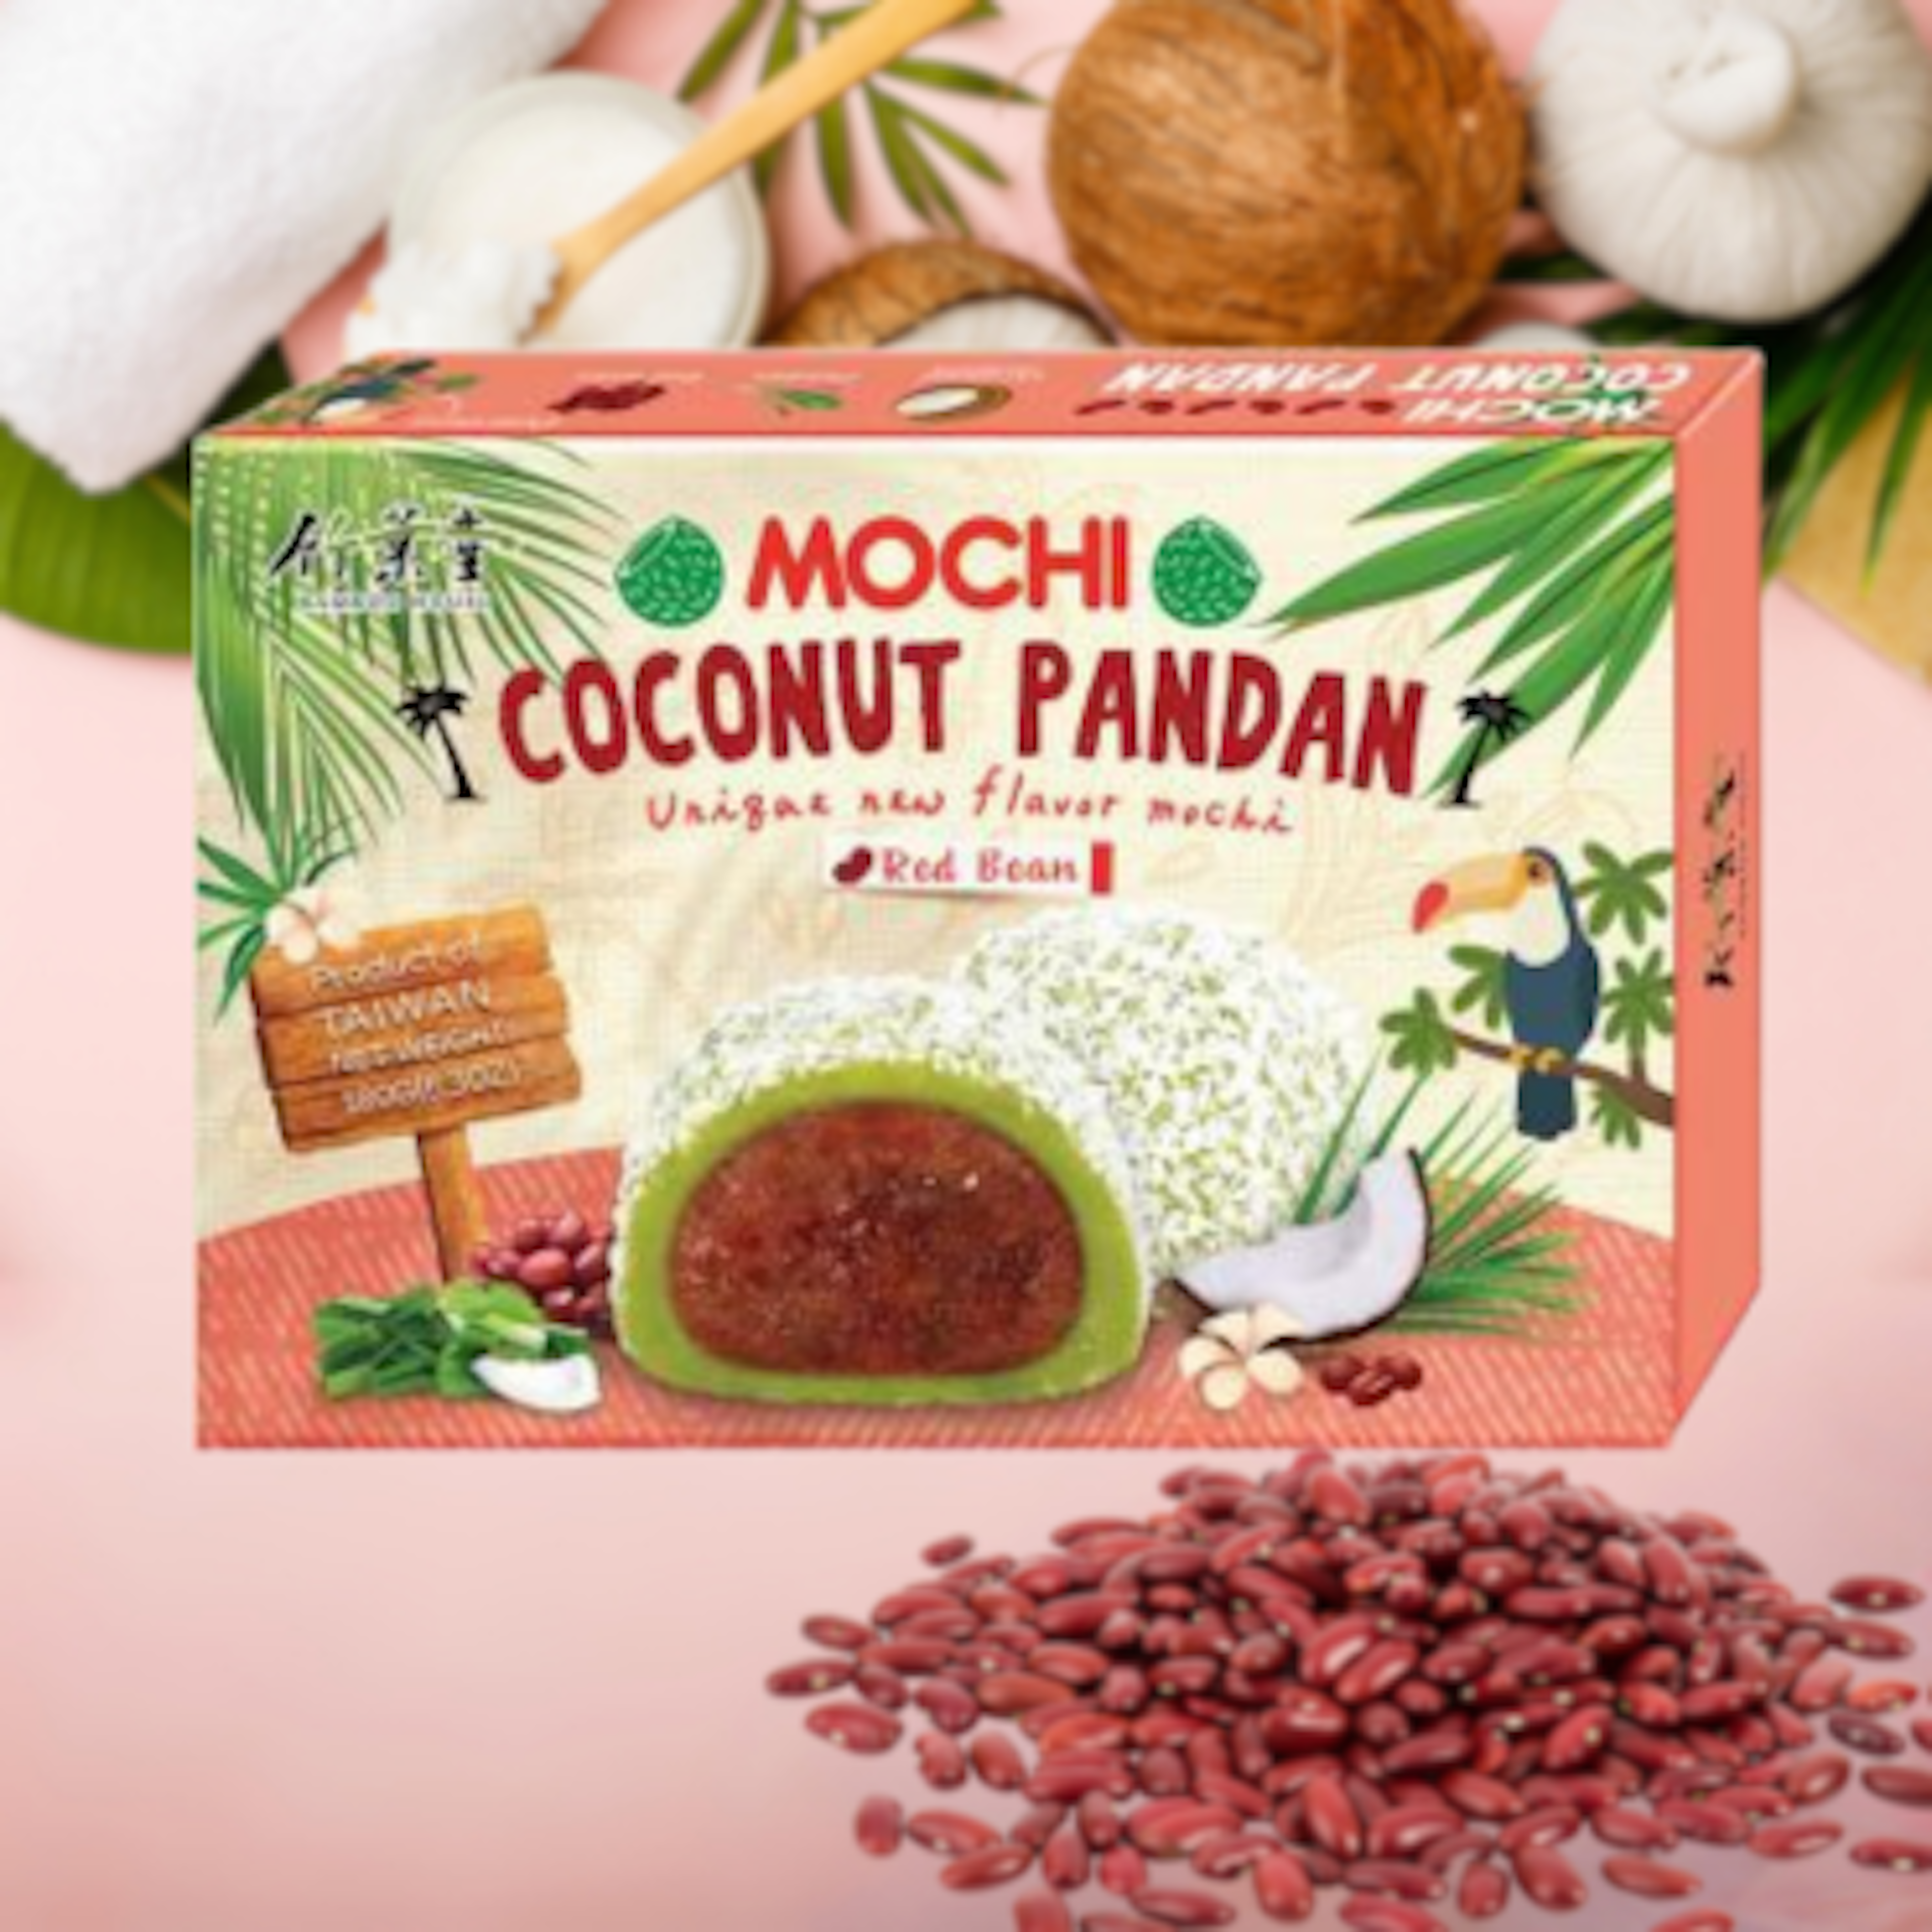 Bamboo House Mochi Coconut Pandan Red Bean 180g - Delicious and Tender Japanese Sweet